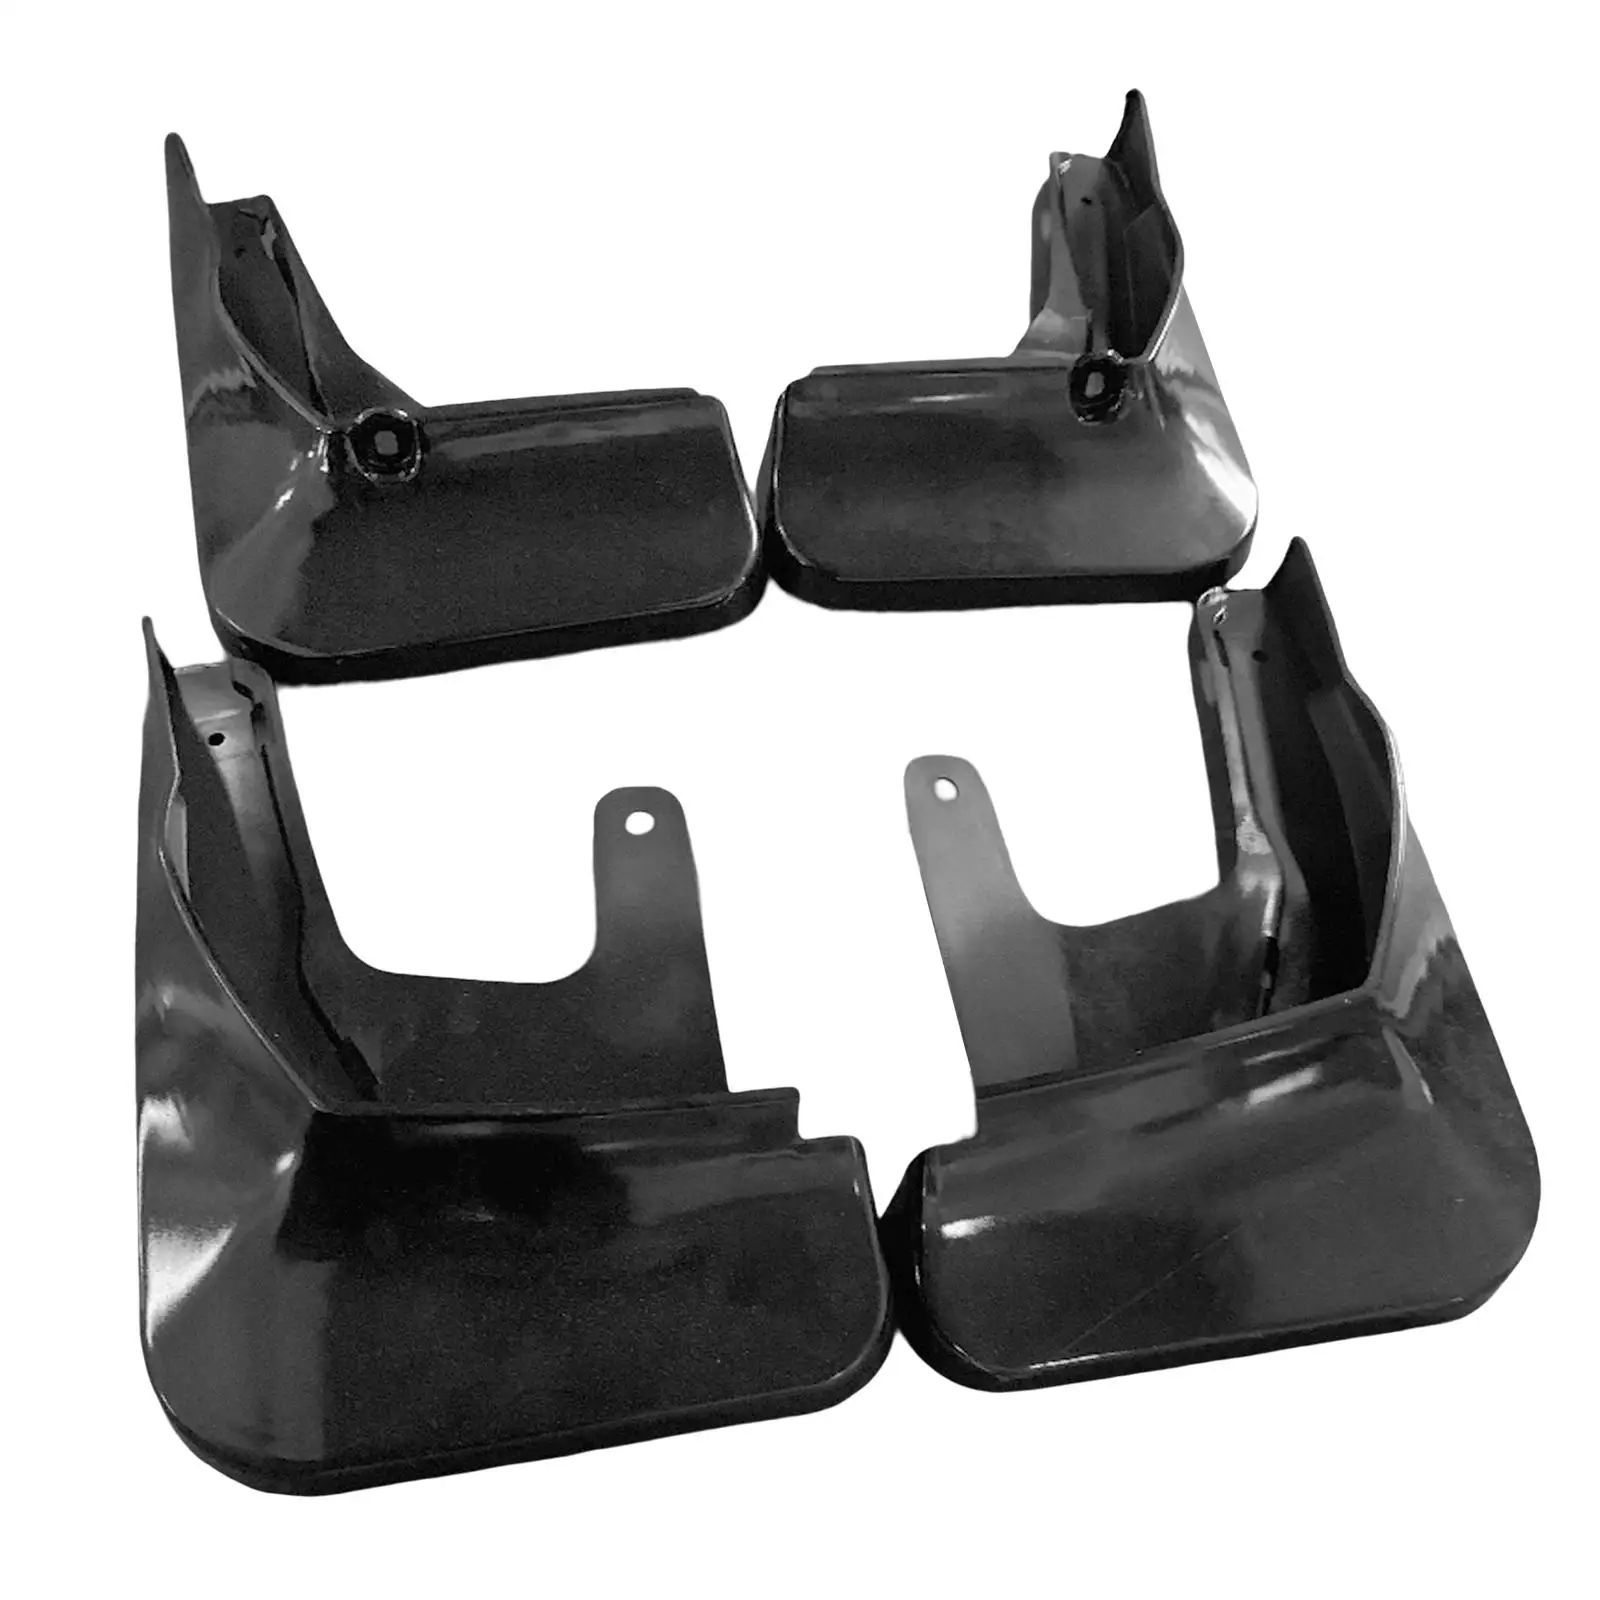 4x Mudguards Car Guards for Atto 3 2022 Modification Assembly Parts